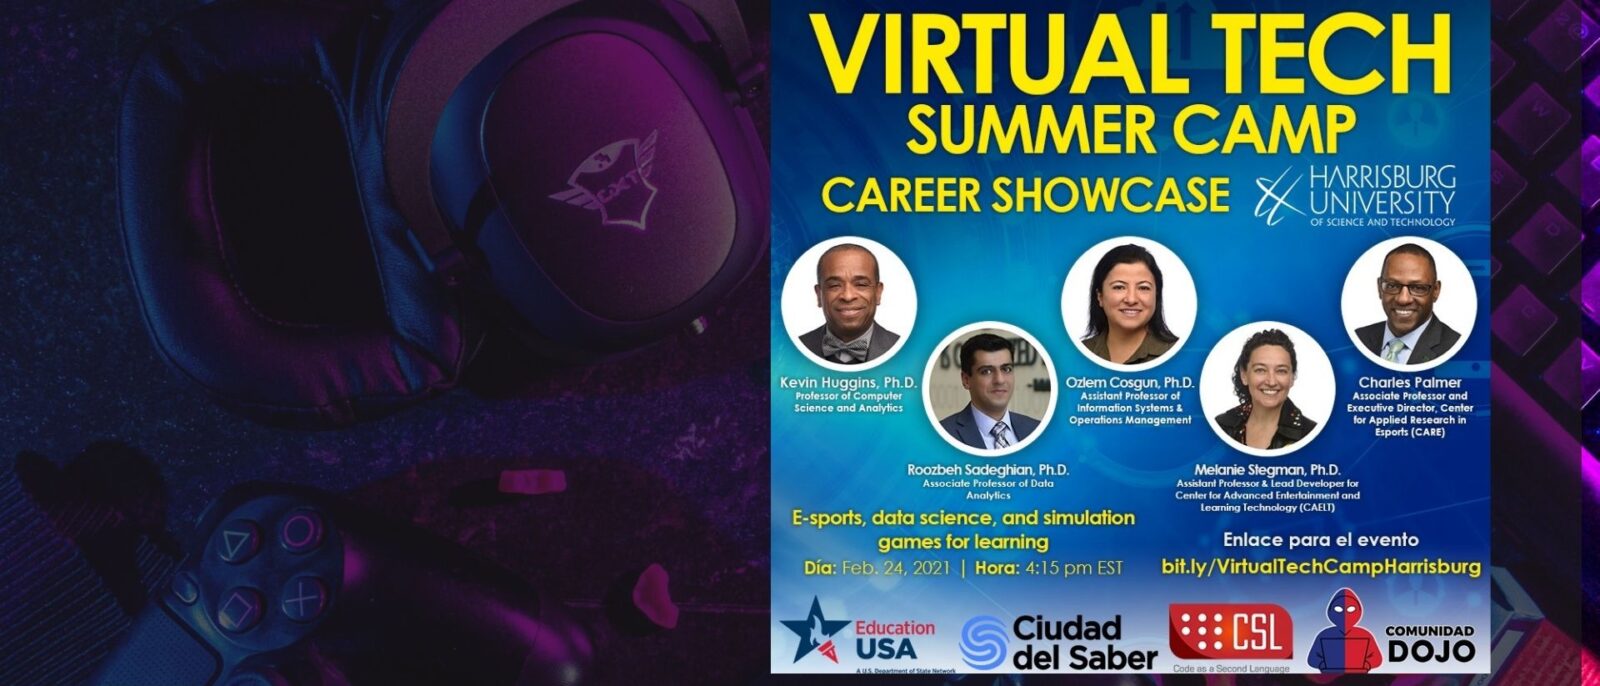 HU professors to discuss tech careers with Panamanian students